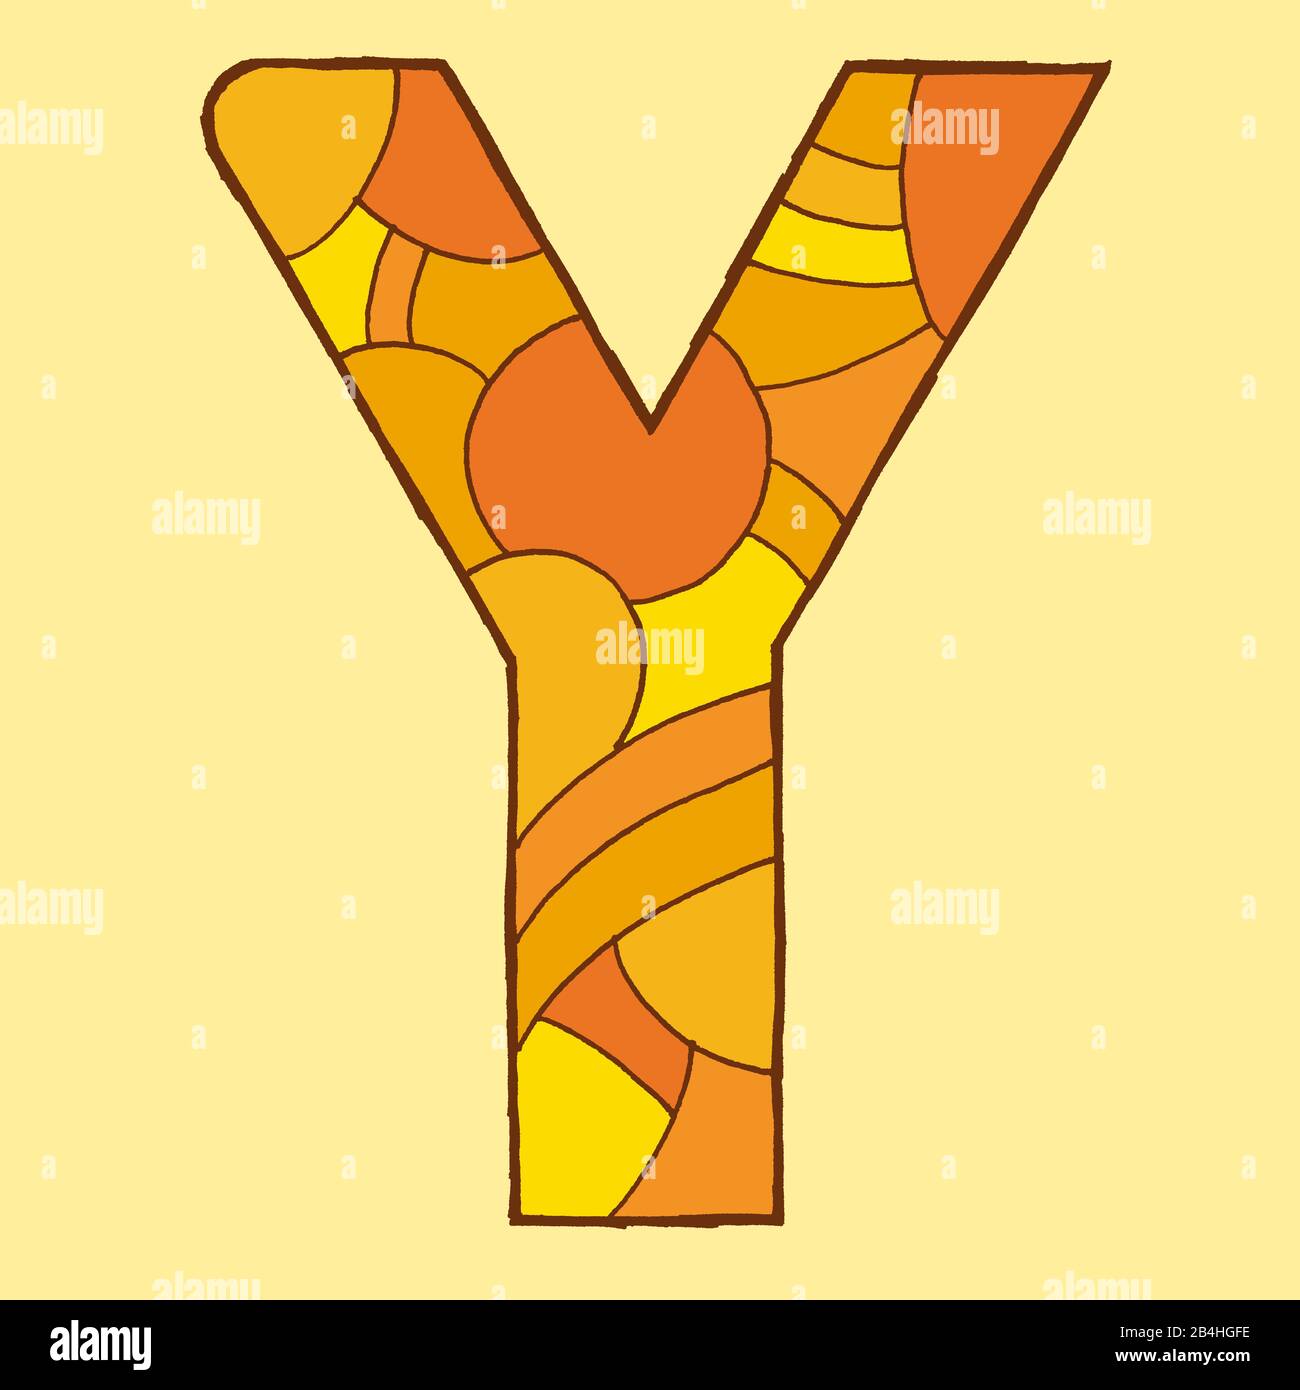 Letter Y, drawn as a vector illustration, in orange shades on a pale yellow background in pop art style Stock Photo